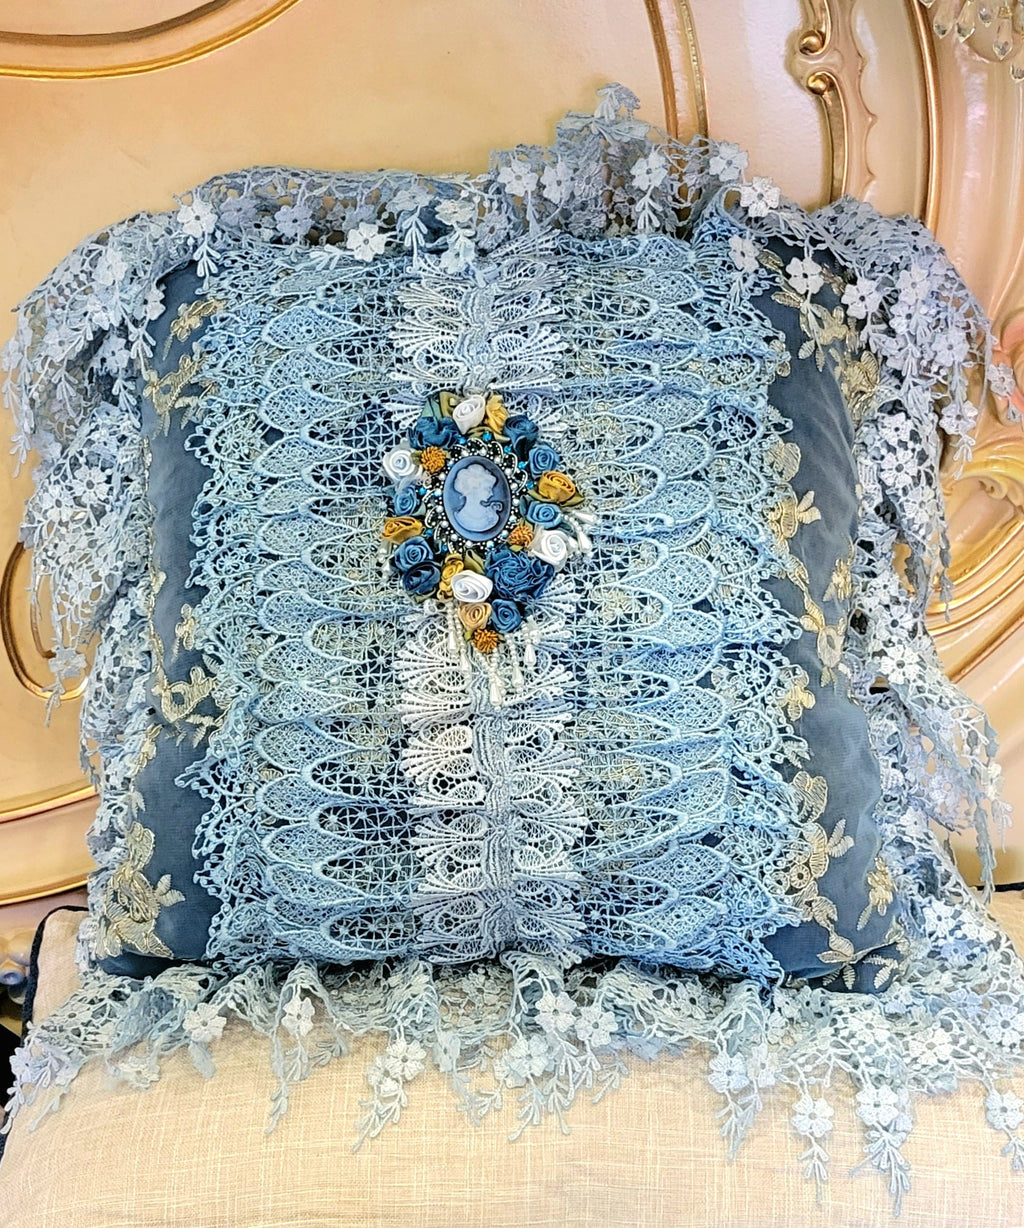 Romantic Victorian Blue Cameo Lace Rose Adorned Square Pillow - One of a Kind!